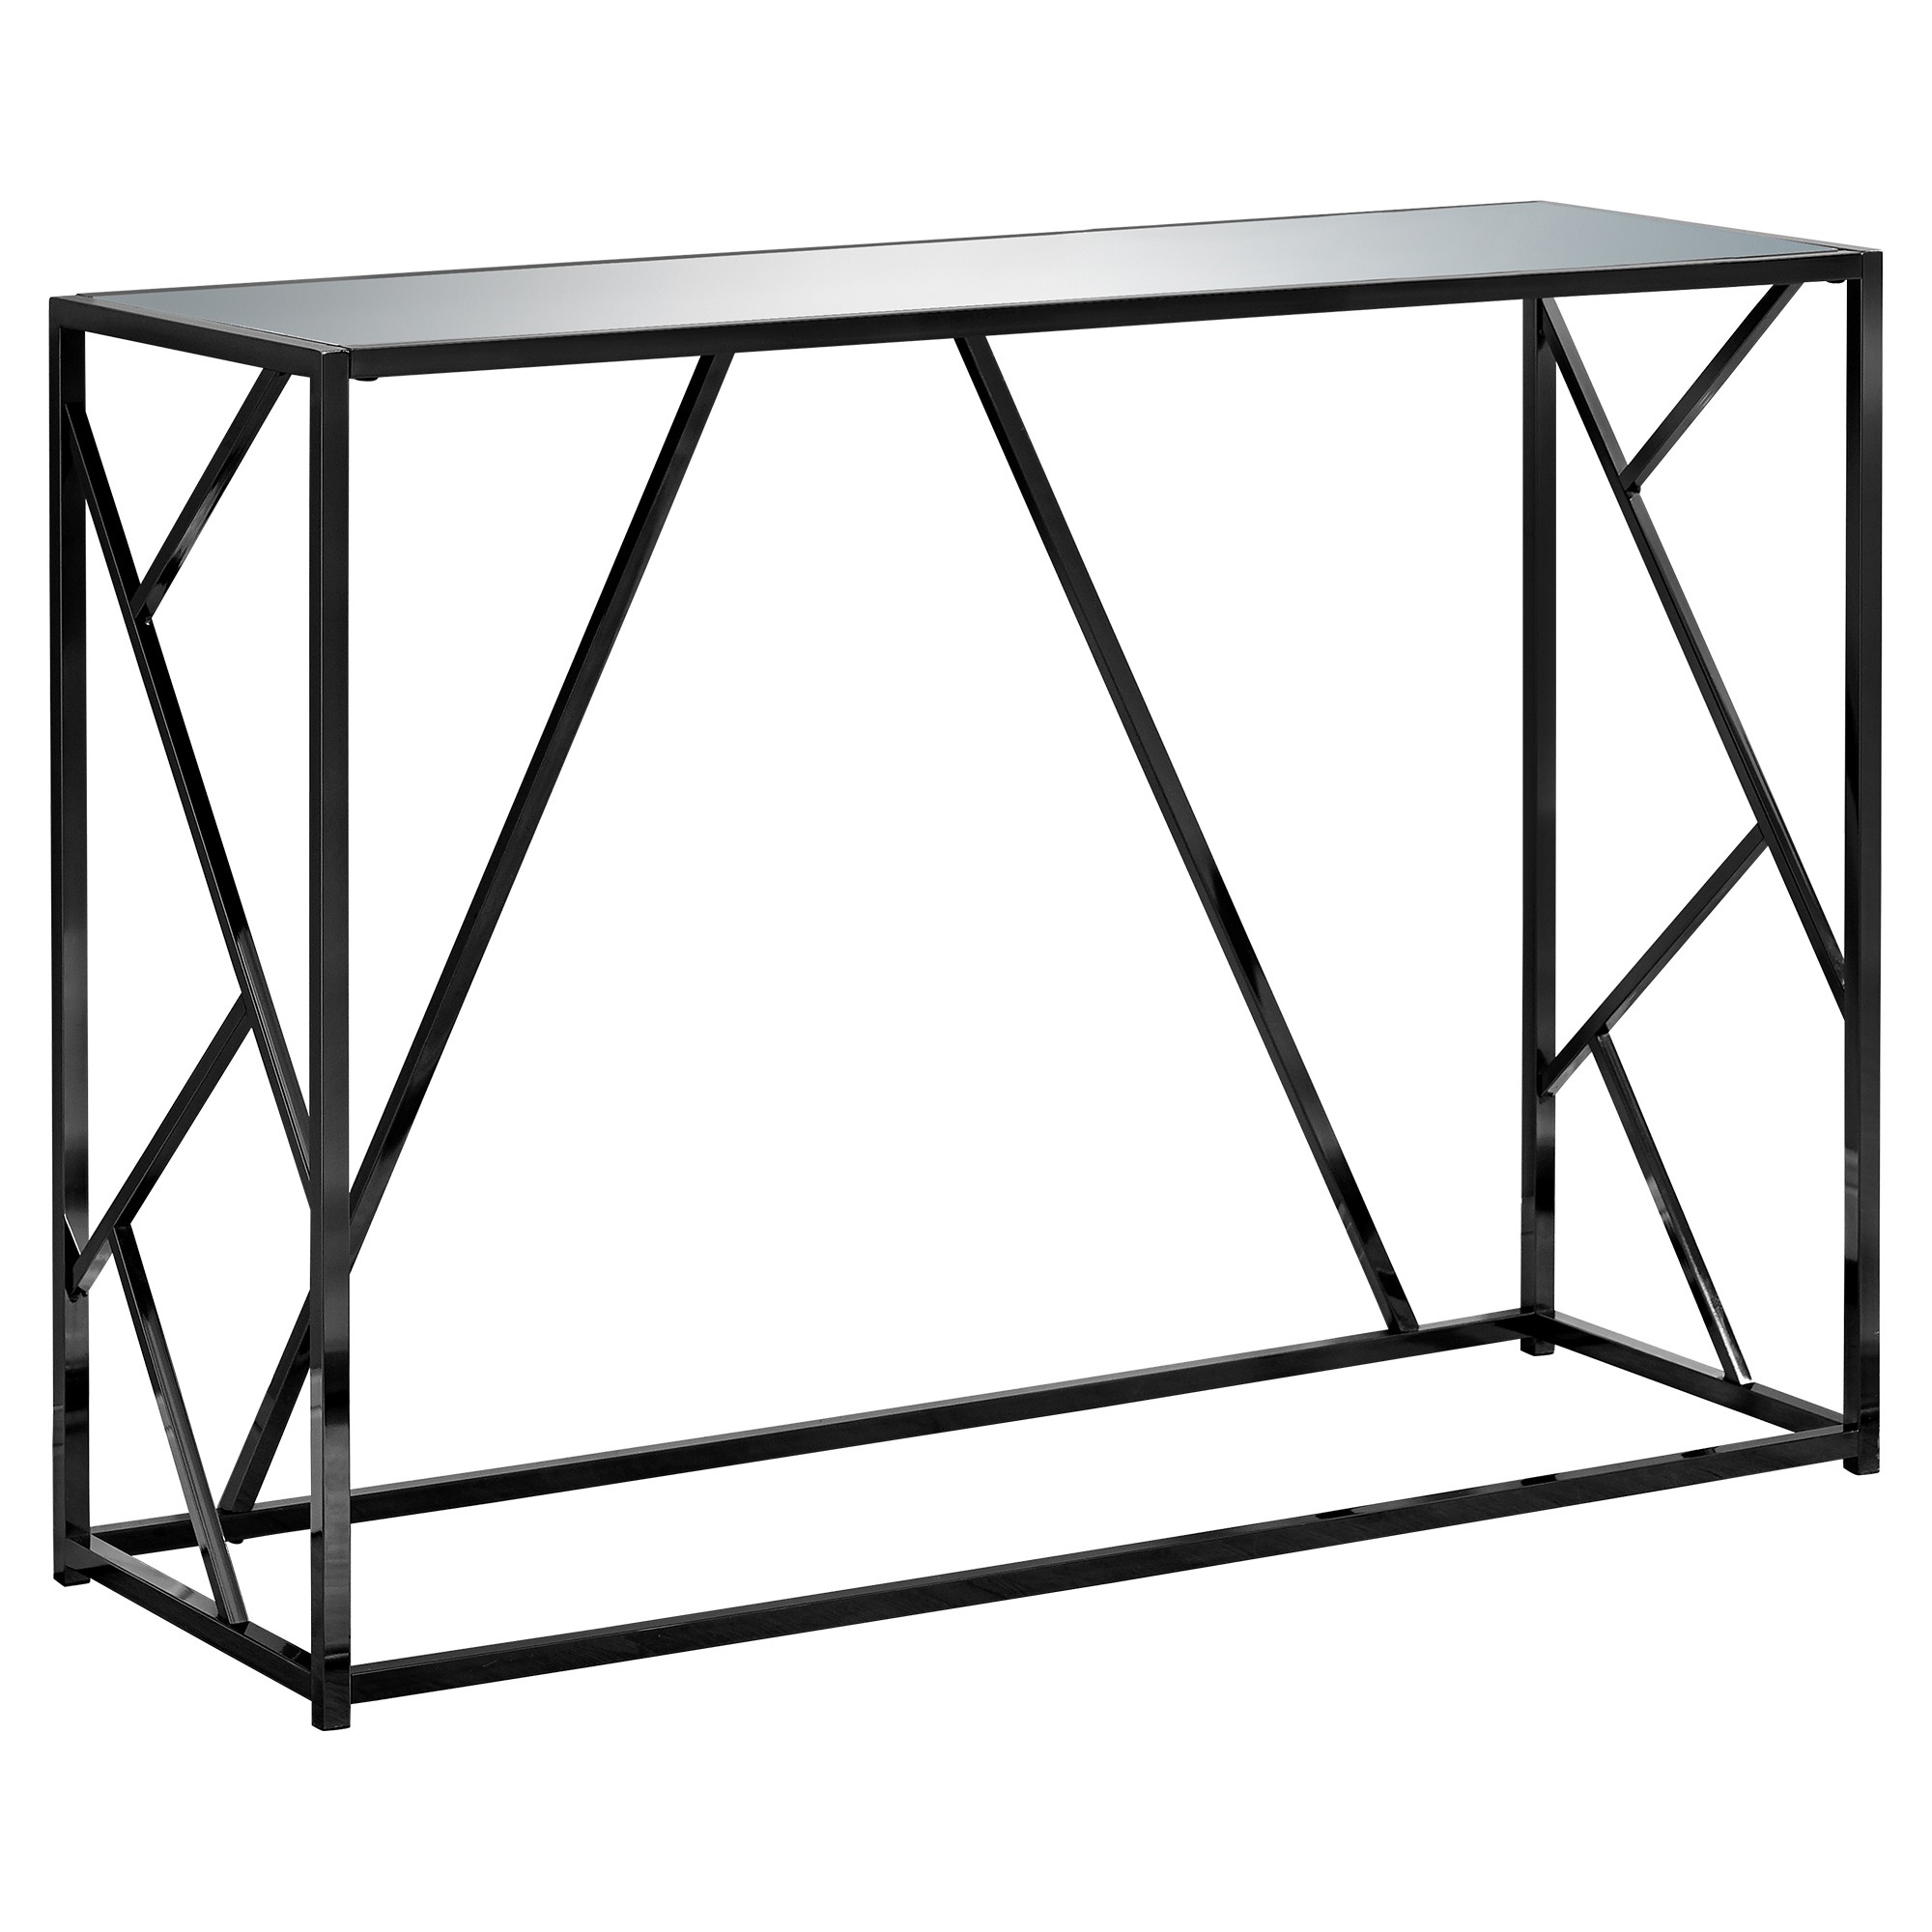 15.75" x 44" x 32" Black Metal Glass Particle Board Accent Table with a Mirror Top